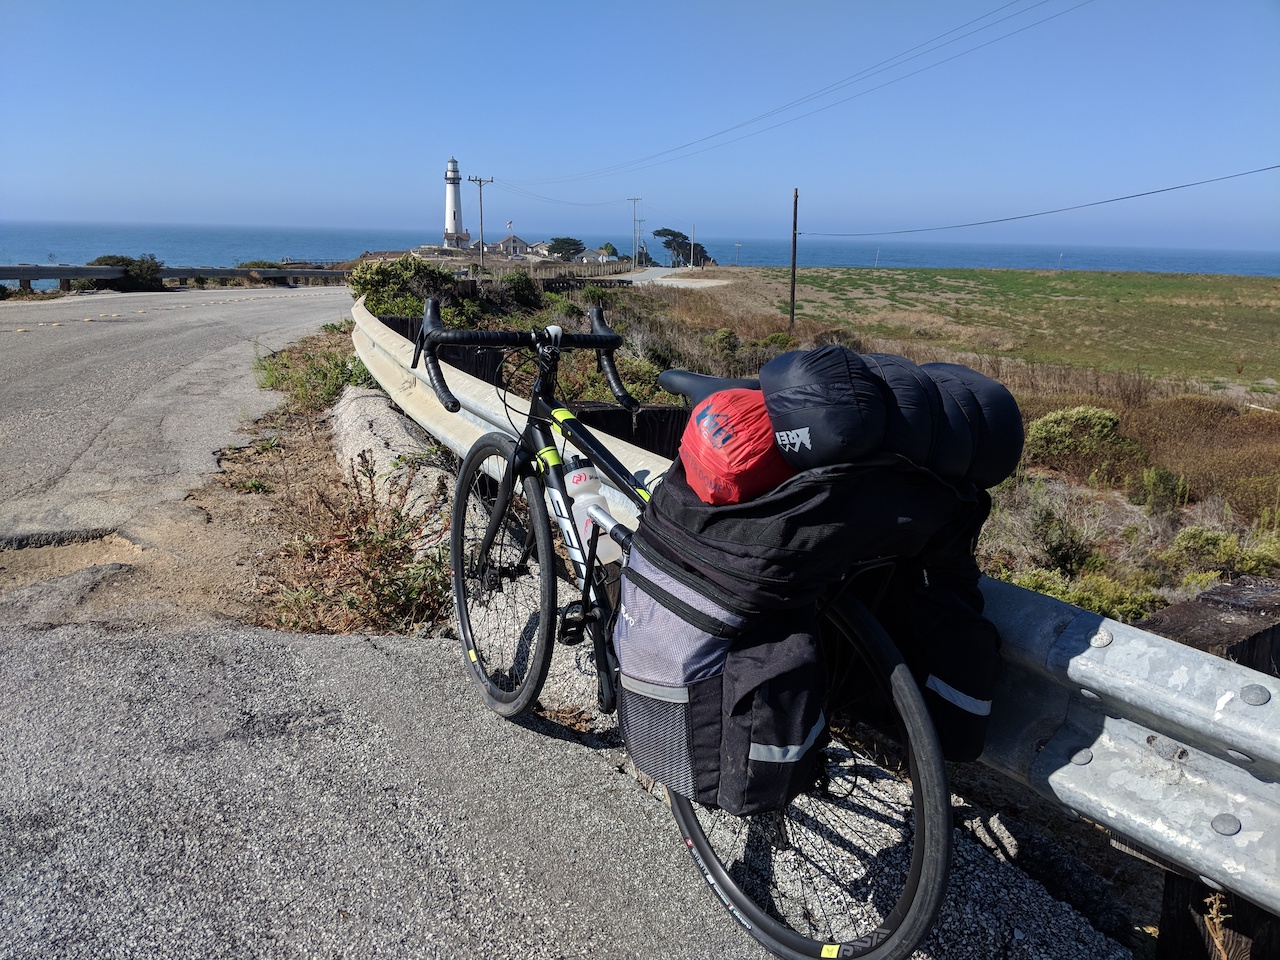 My bike with all my gear in panniers.